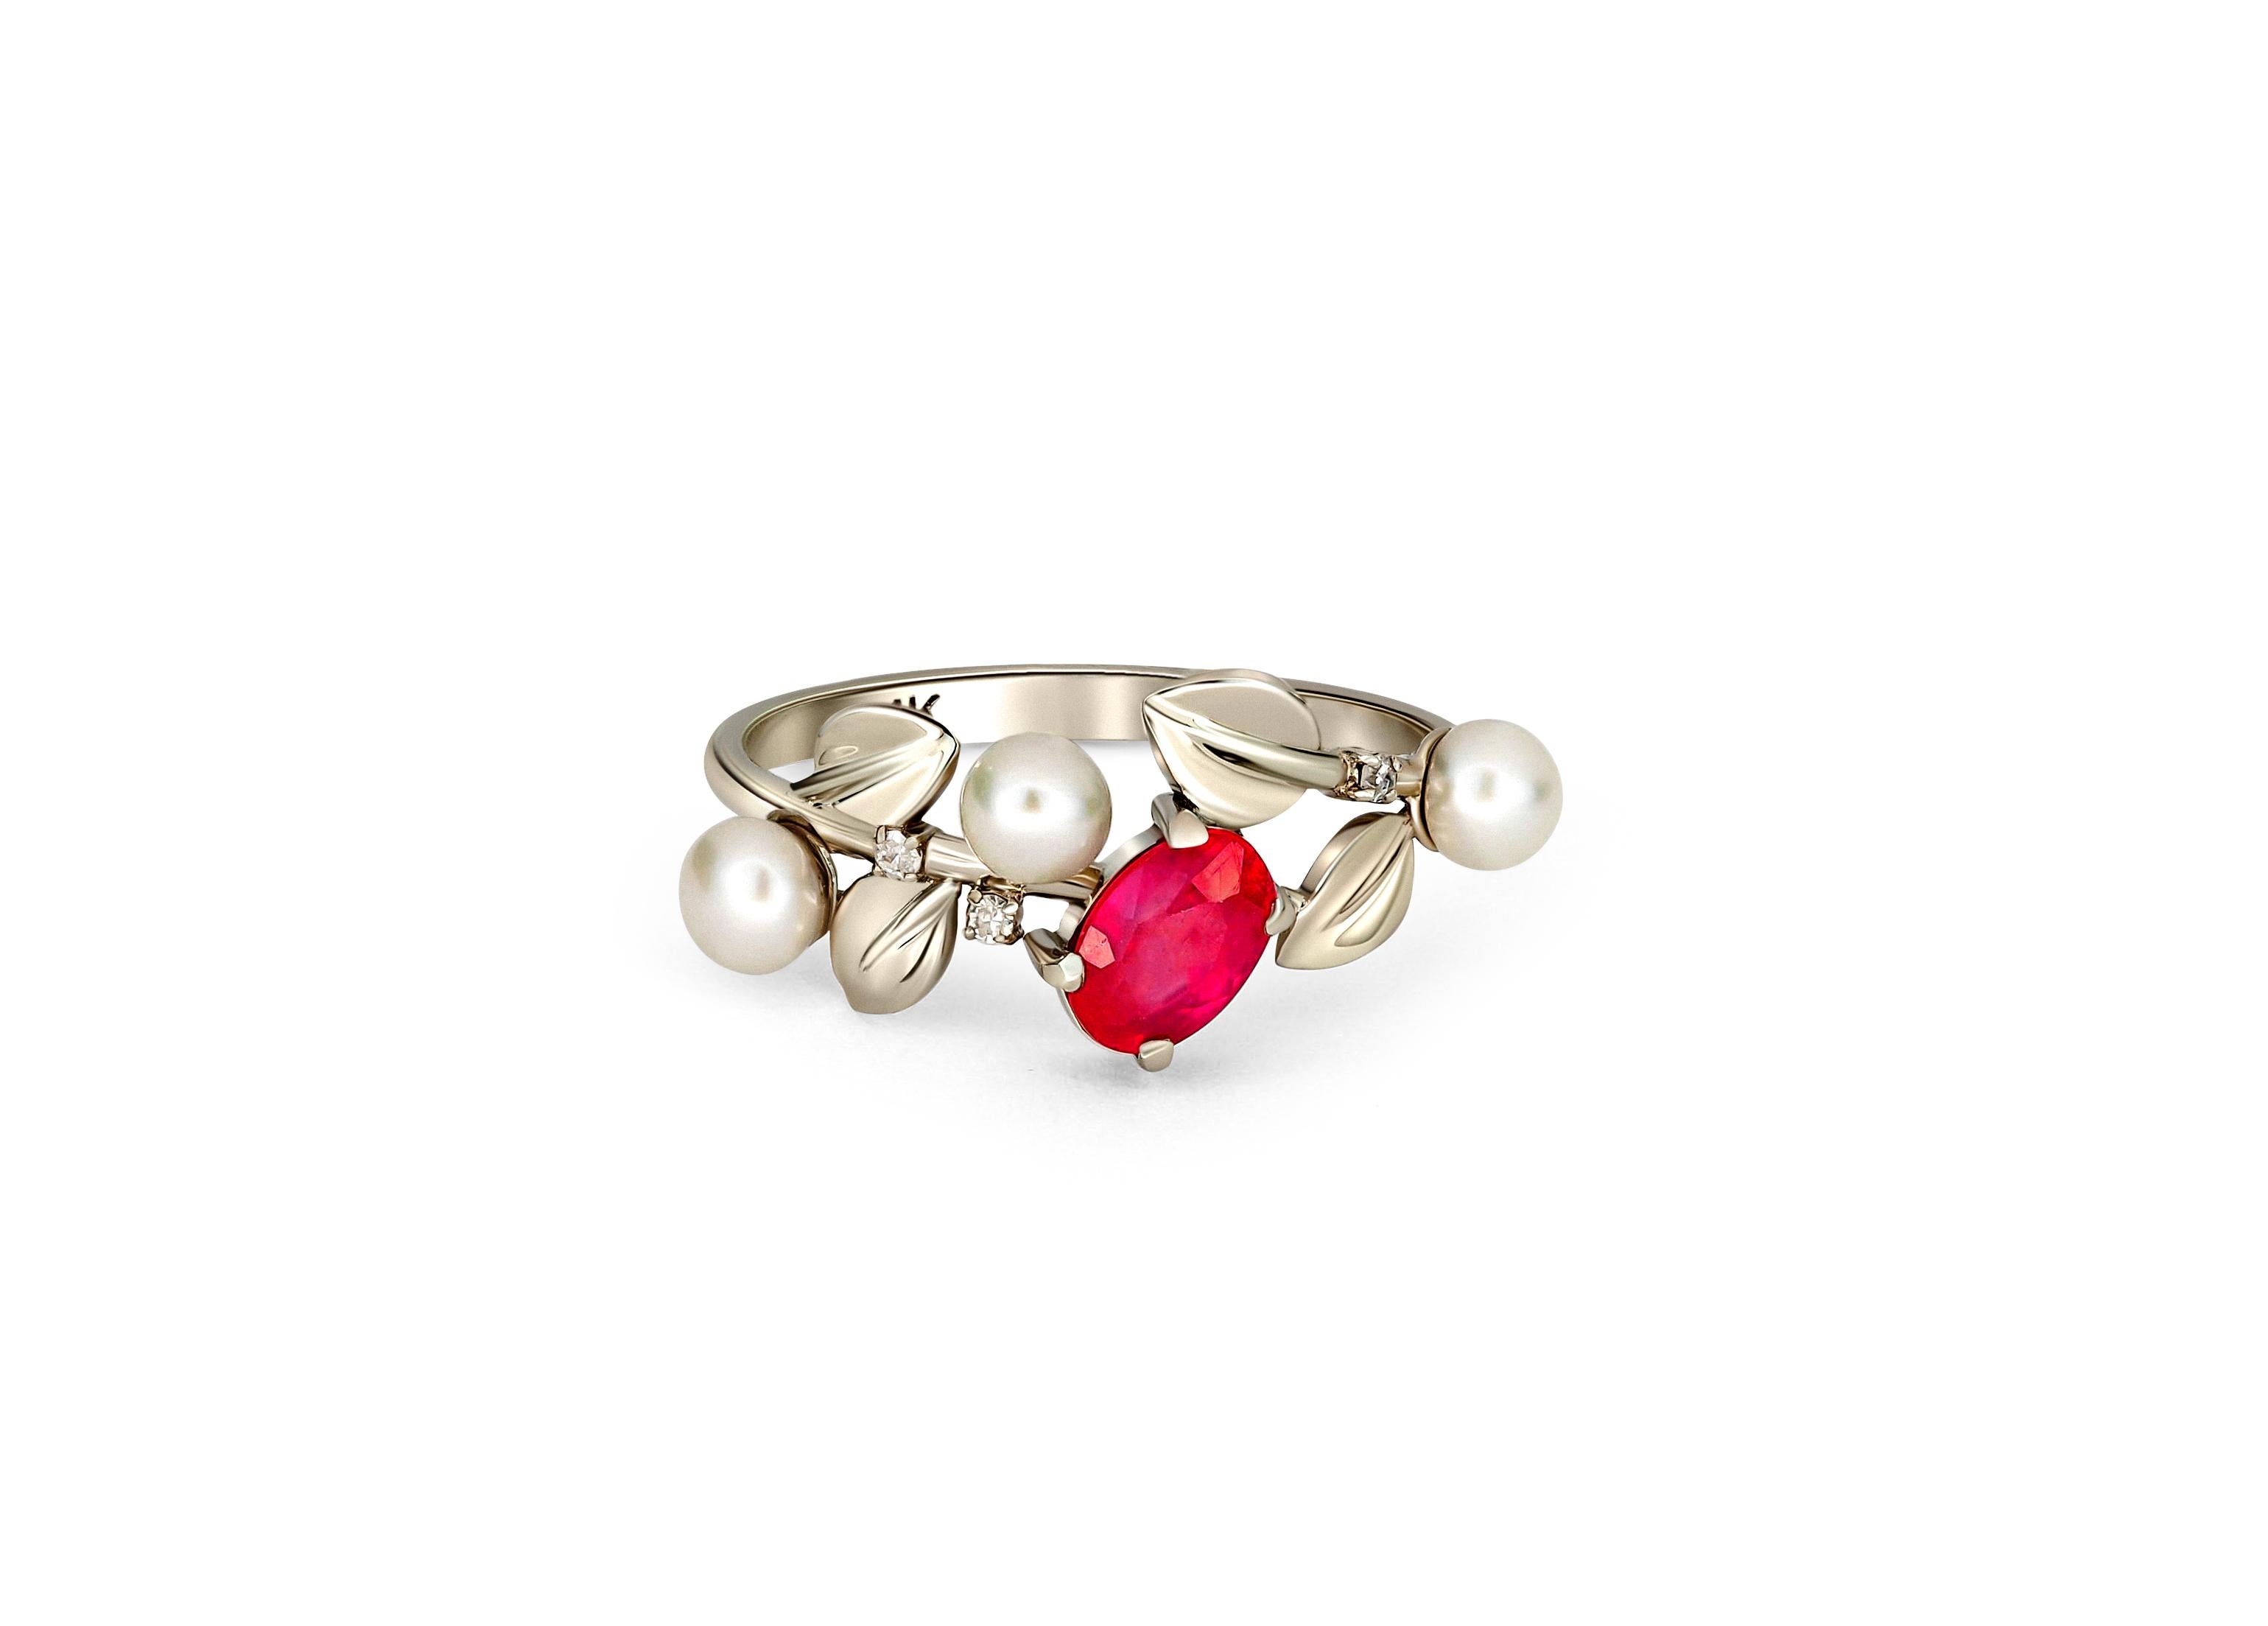 Ruby and pearl gold ring. 
Statement red ruby ring. Anniversary gift for her. Luxury dinner ruby ring. July birthstone ring. Flower gold ring.

Metal: 14k gold
Weight: 2.2 g. depends from size.

Central stone: ruby
Cut: Oval
Weight: aprx 0.7 ct.